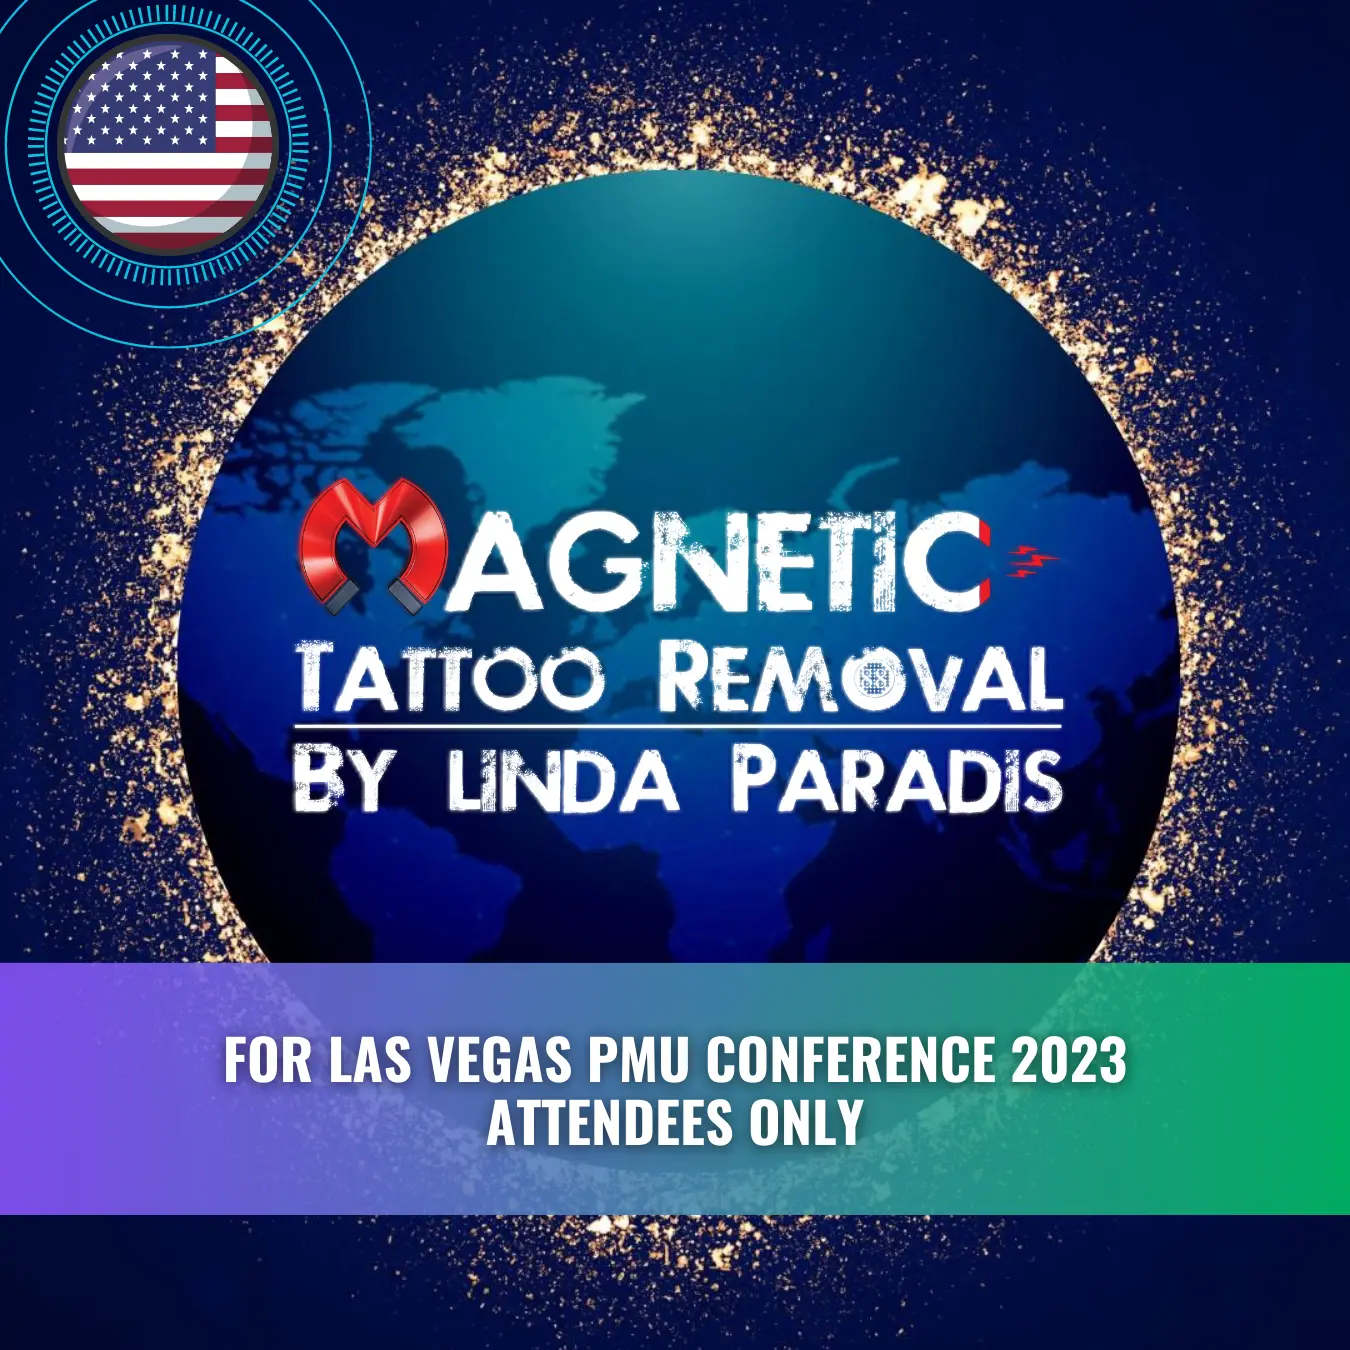 Magnetic Tattoo Removal Training for Las Vegas PMU Conference 2023 Attendees